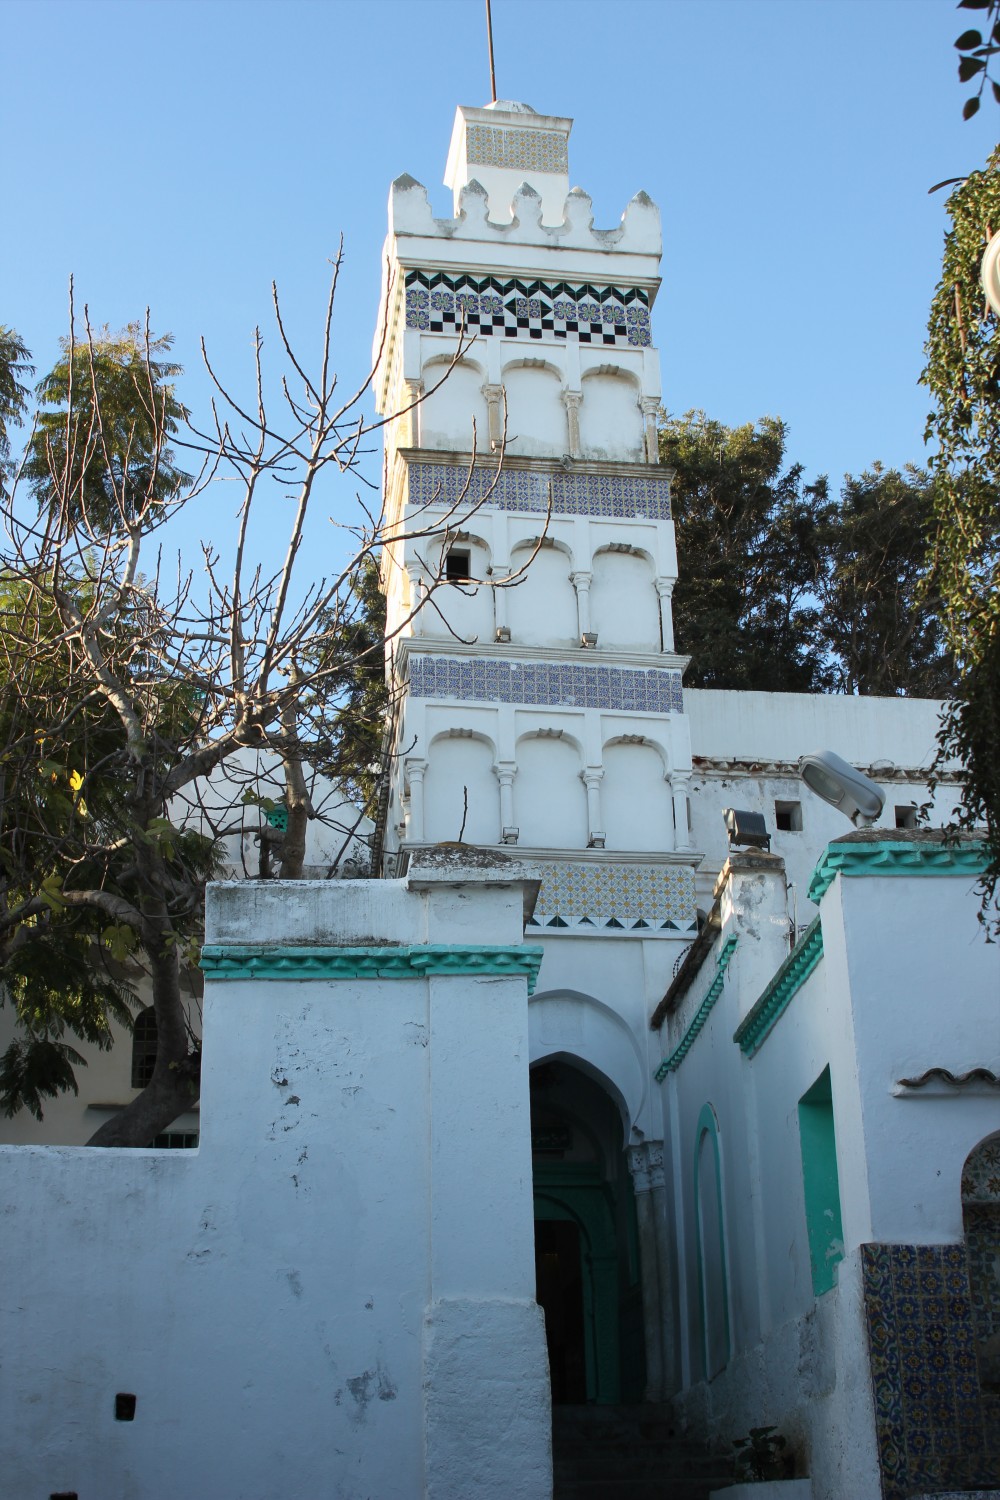 Full view of the minaret showing the entrance to the mausoleum